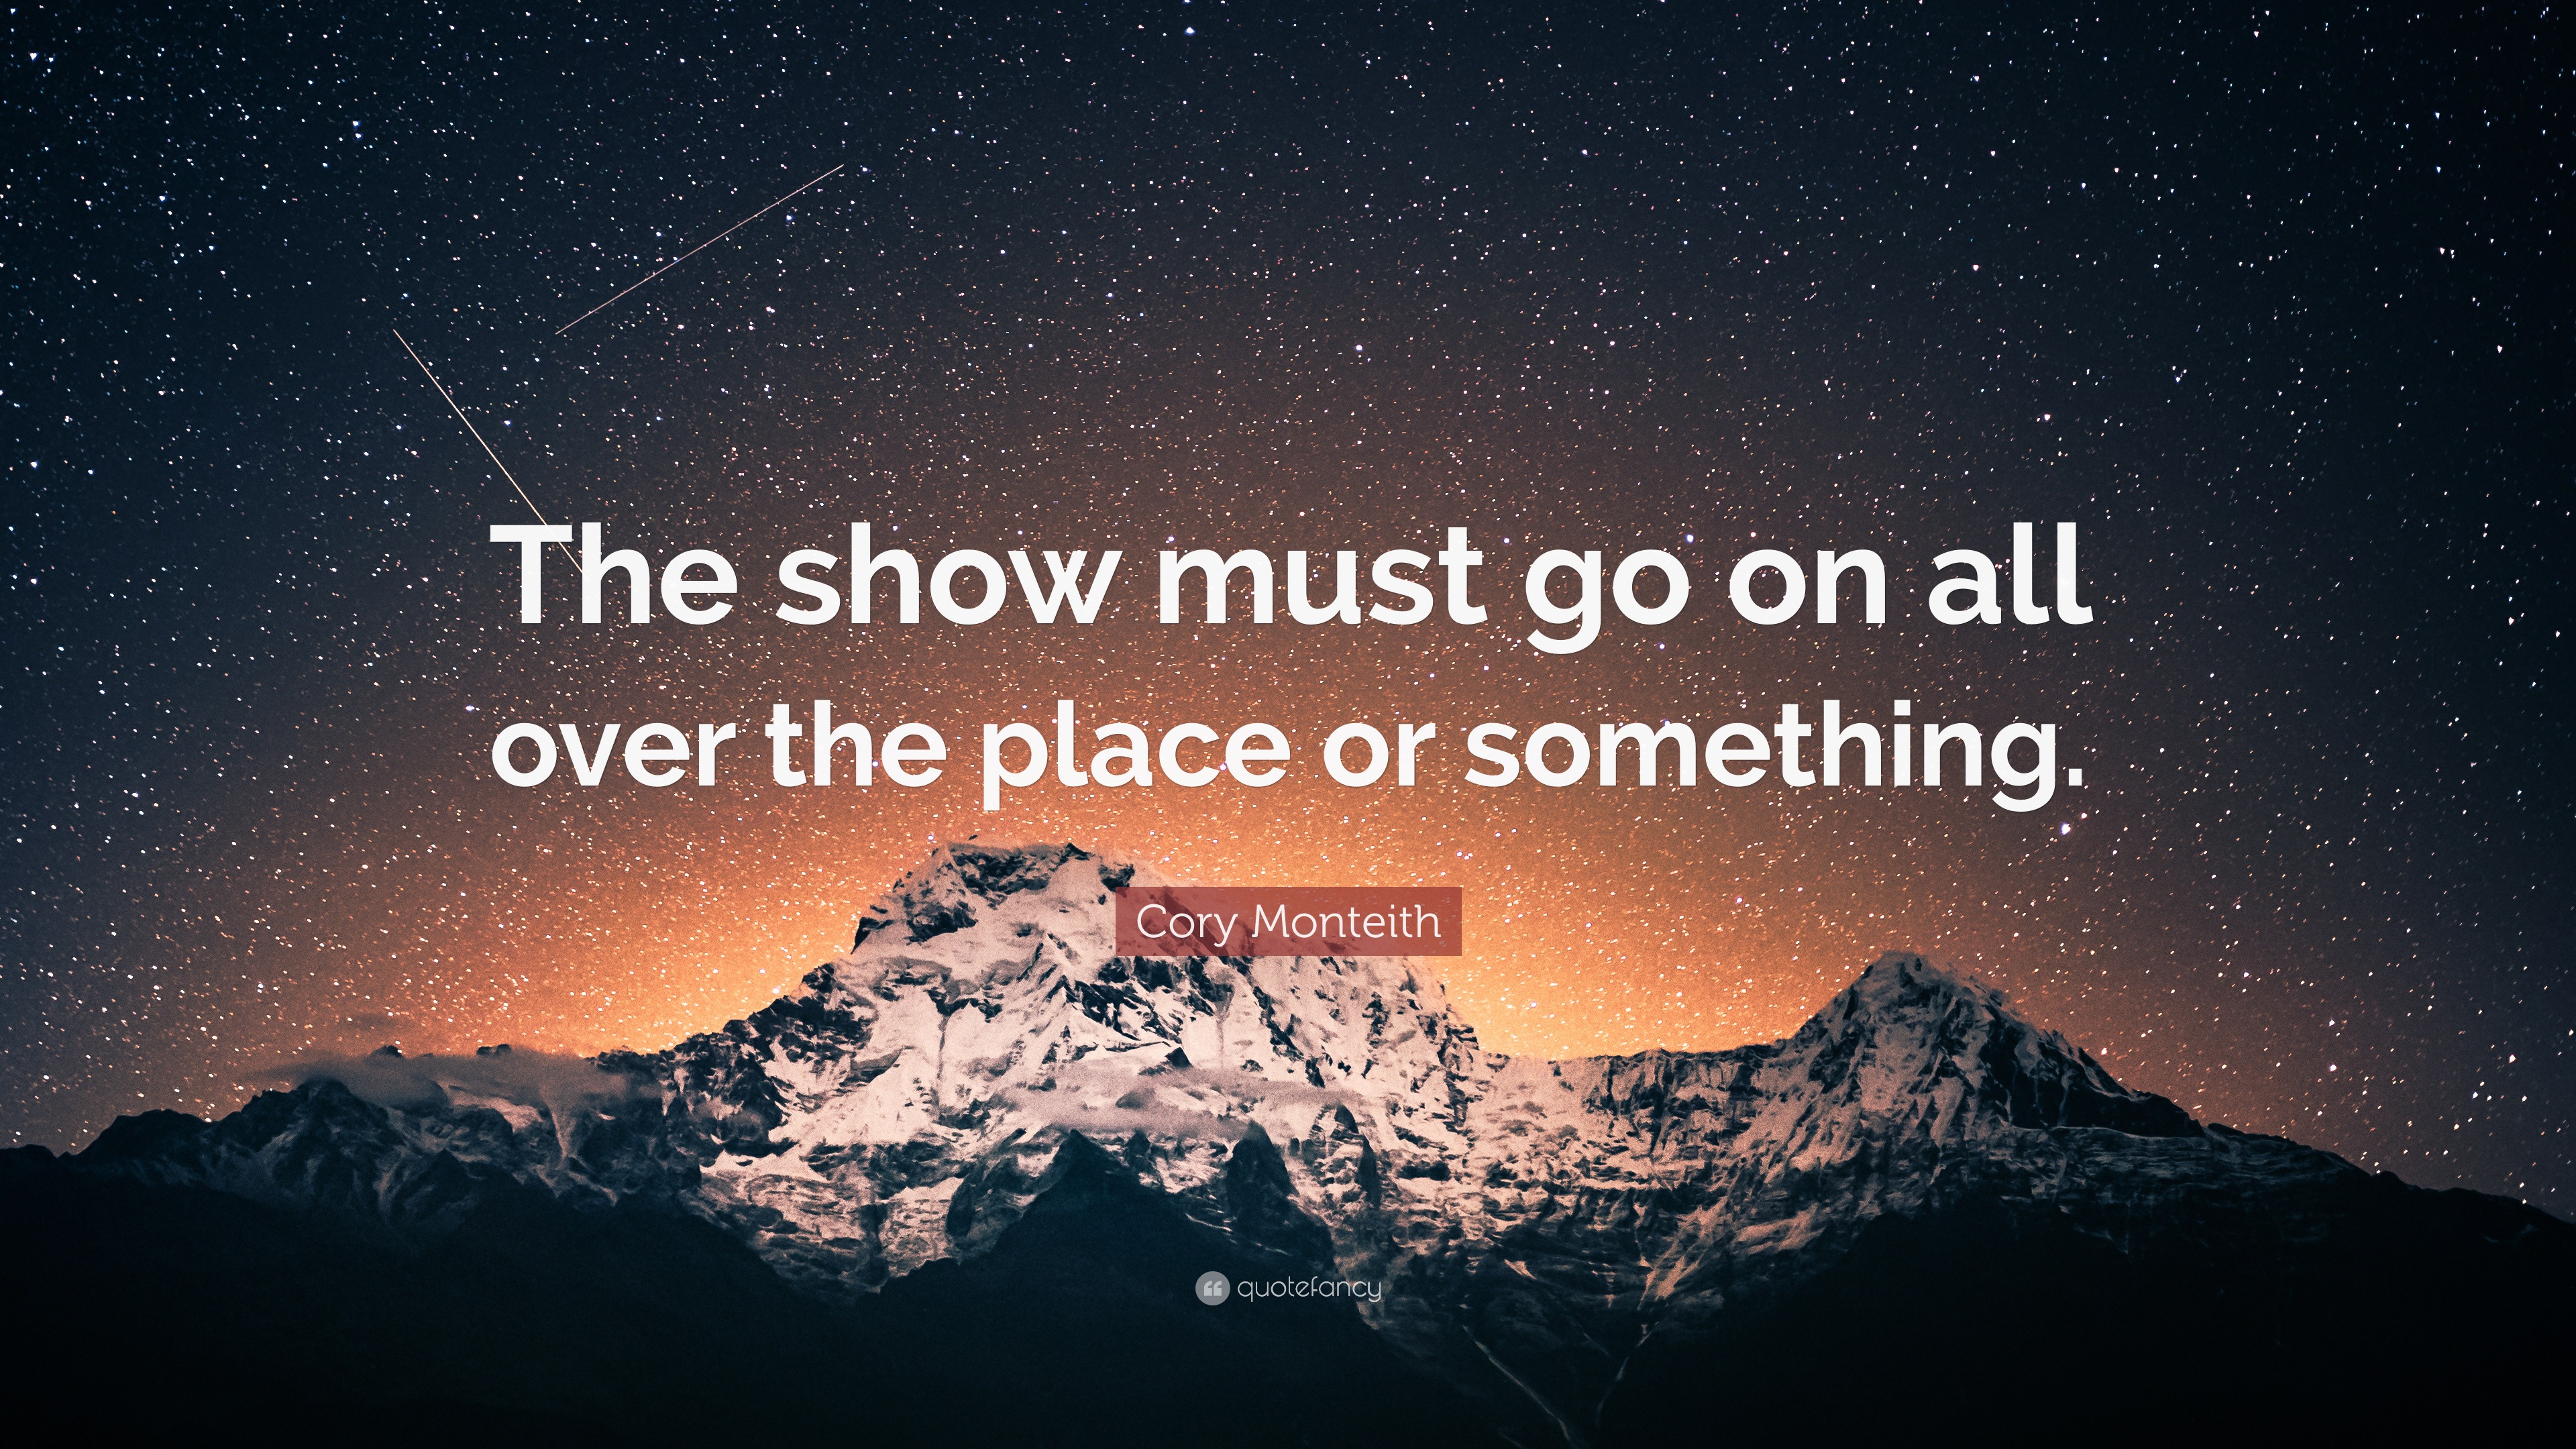 Cory Monteith Quote: "The show must go on all over the place or something." (10 wallpapers ...